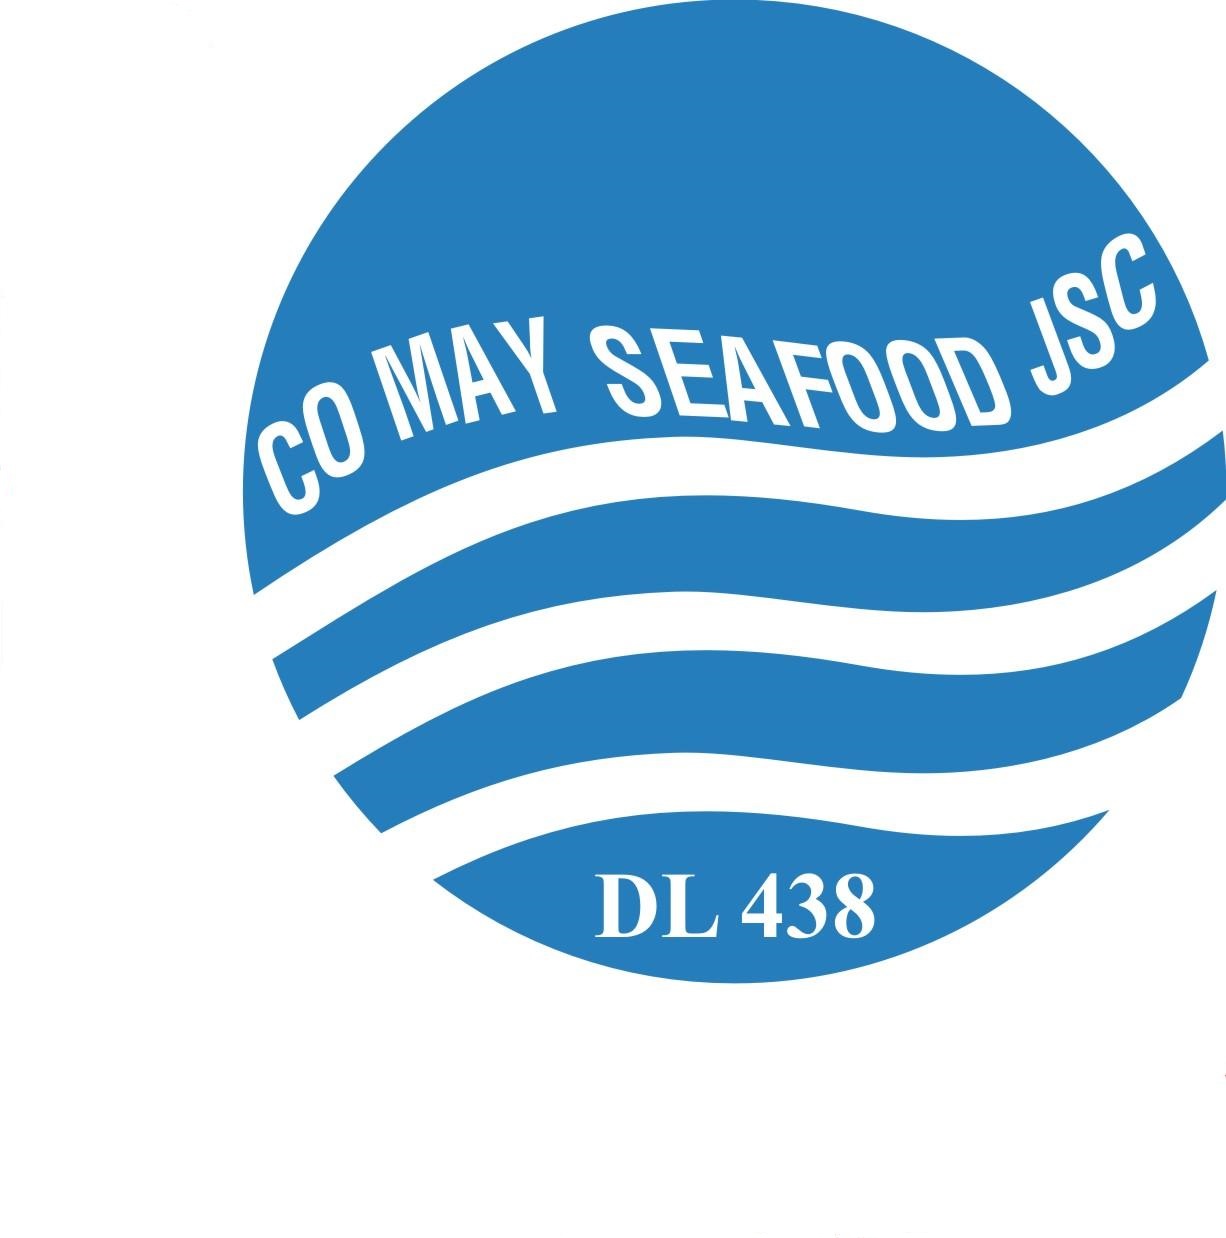 CO MAY SEAFOOD JOINT STOCK COMPANY